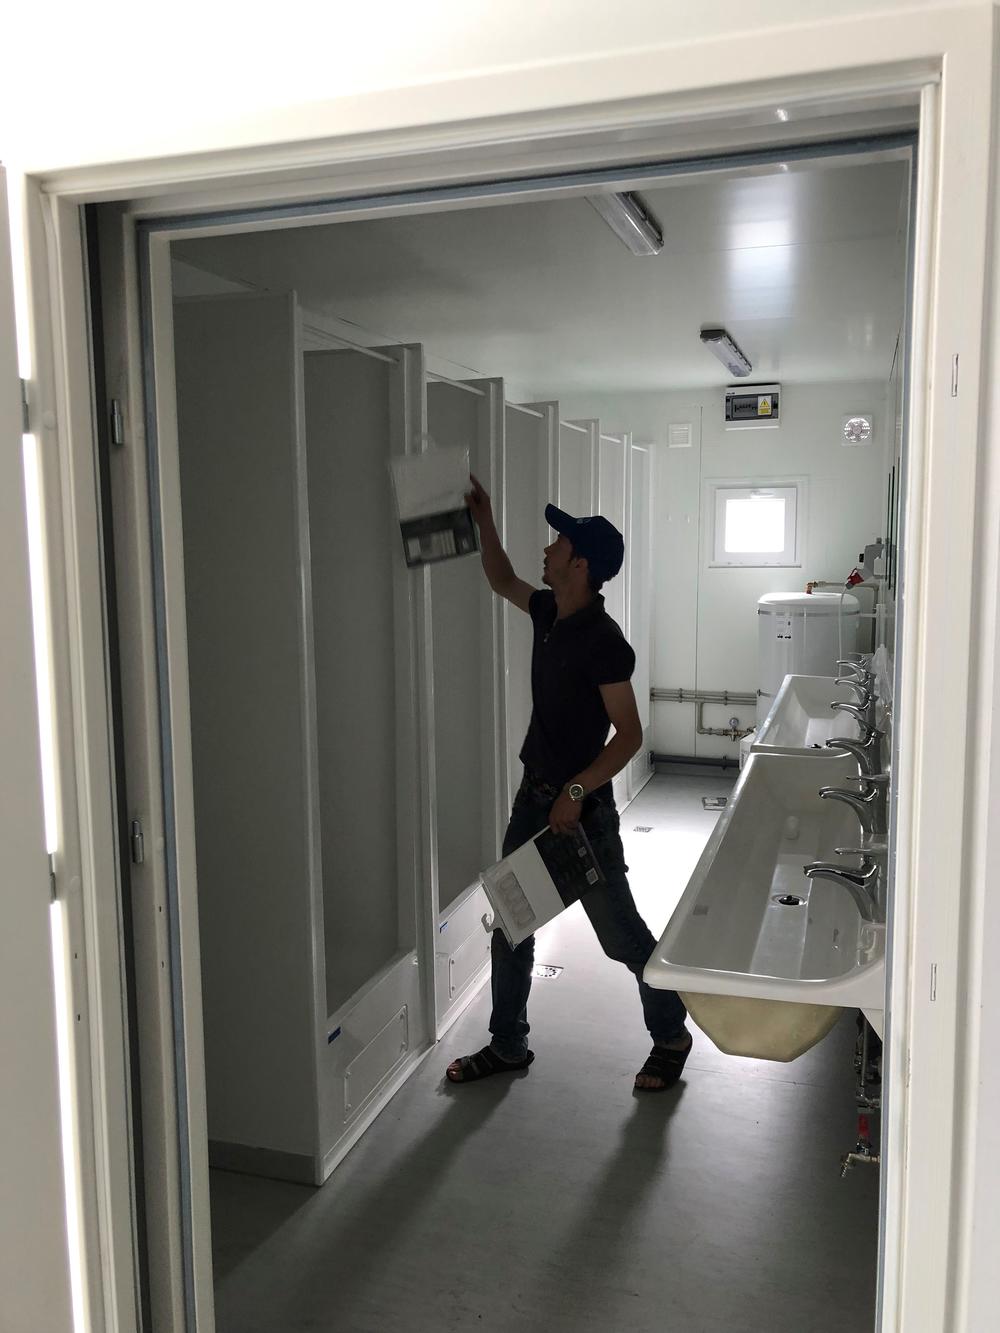 A worker fixes up prefabricated dorms that will soon open to Bucha residents whose homes were destroyed. Poland donated the dorms, which can be constructed in just a few days.